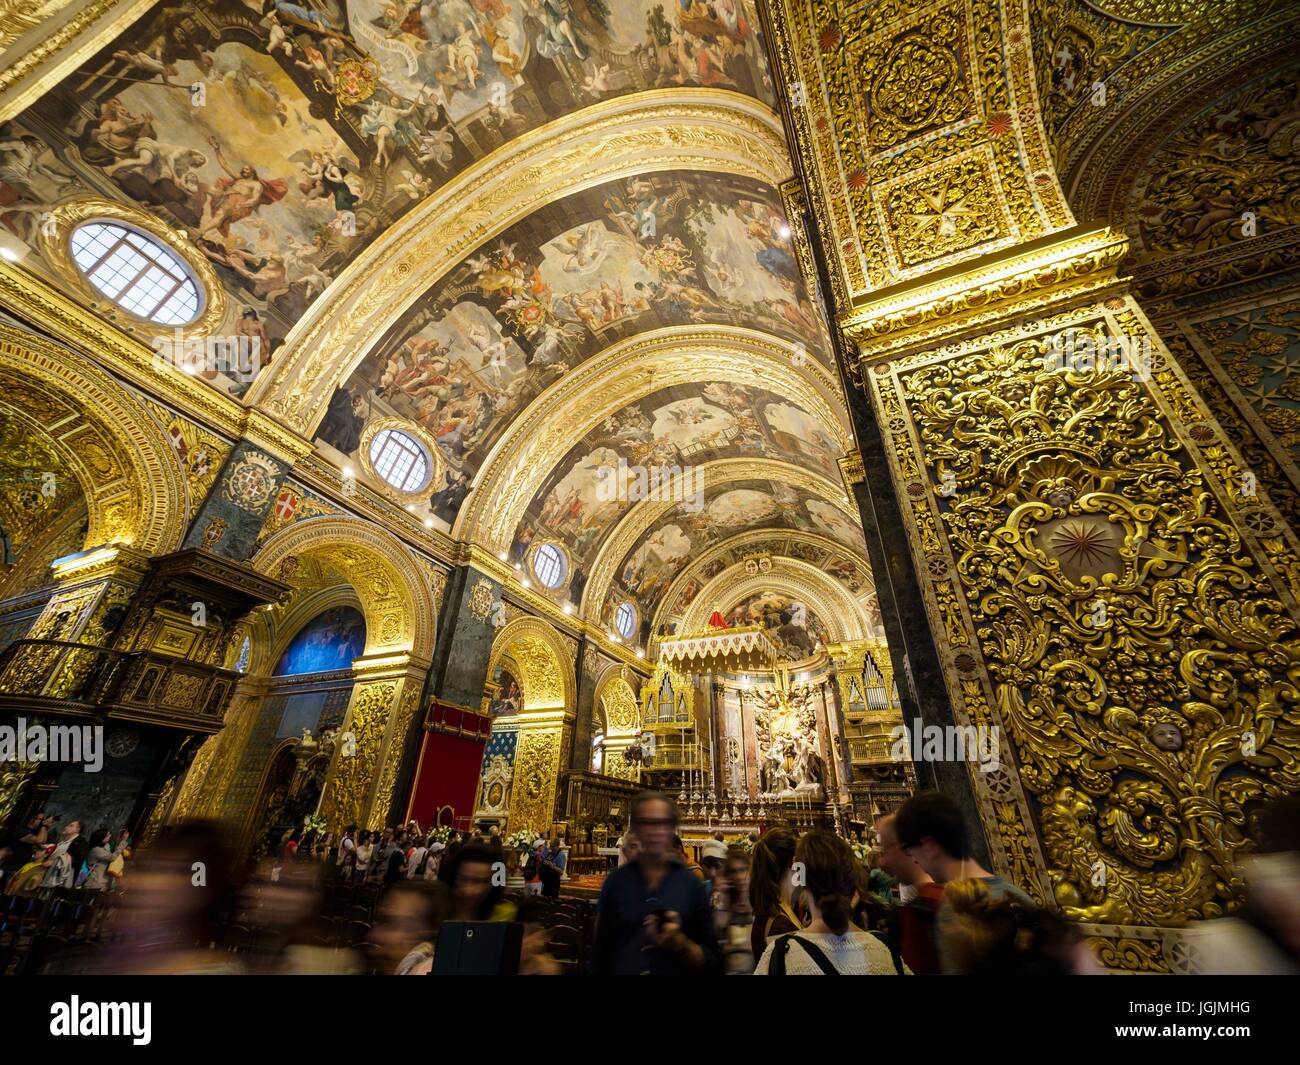 Interior view of St. John's Co-Cathedral at the capital Valletta / Malta. Stock Photo